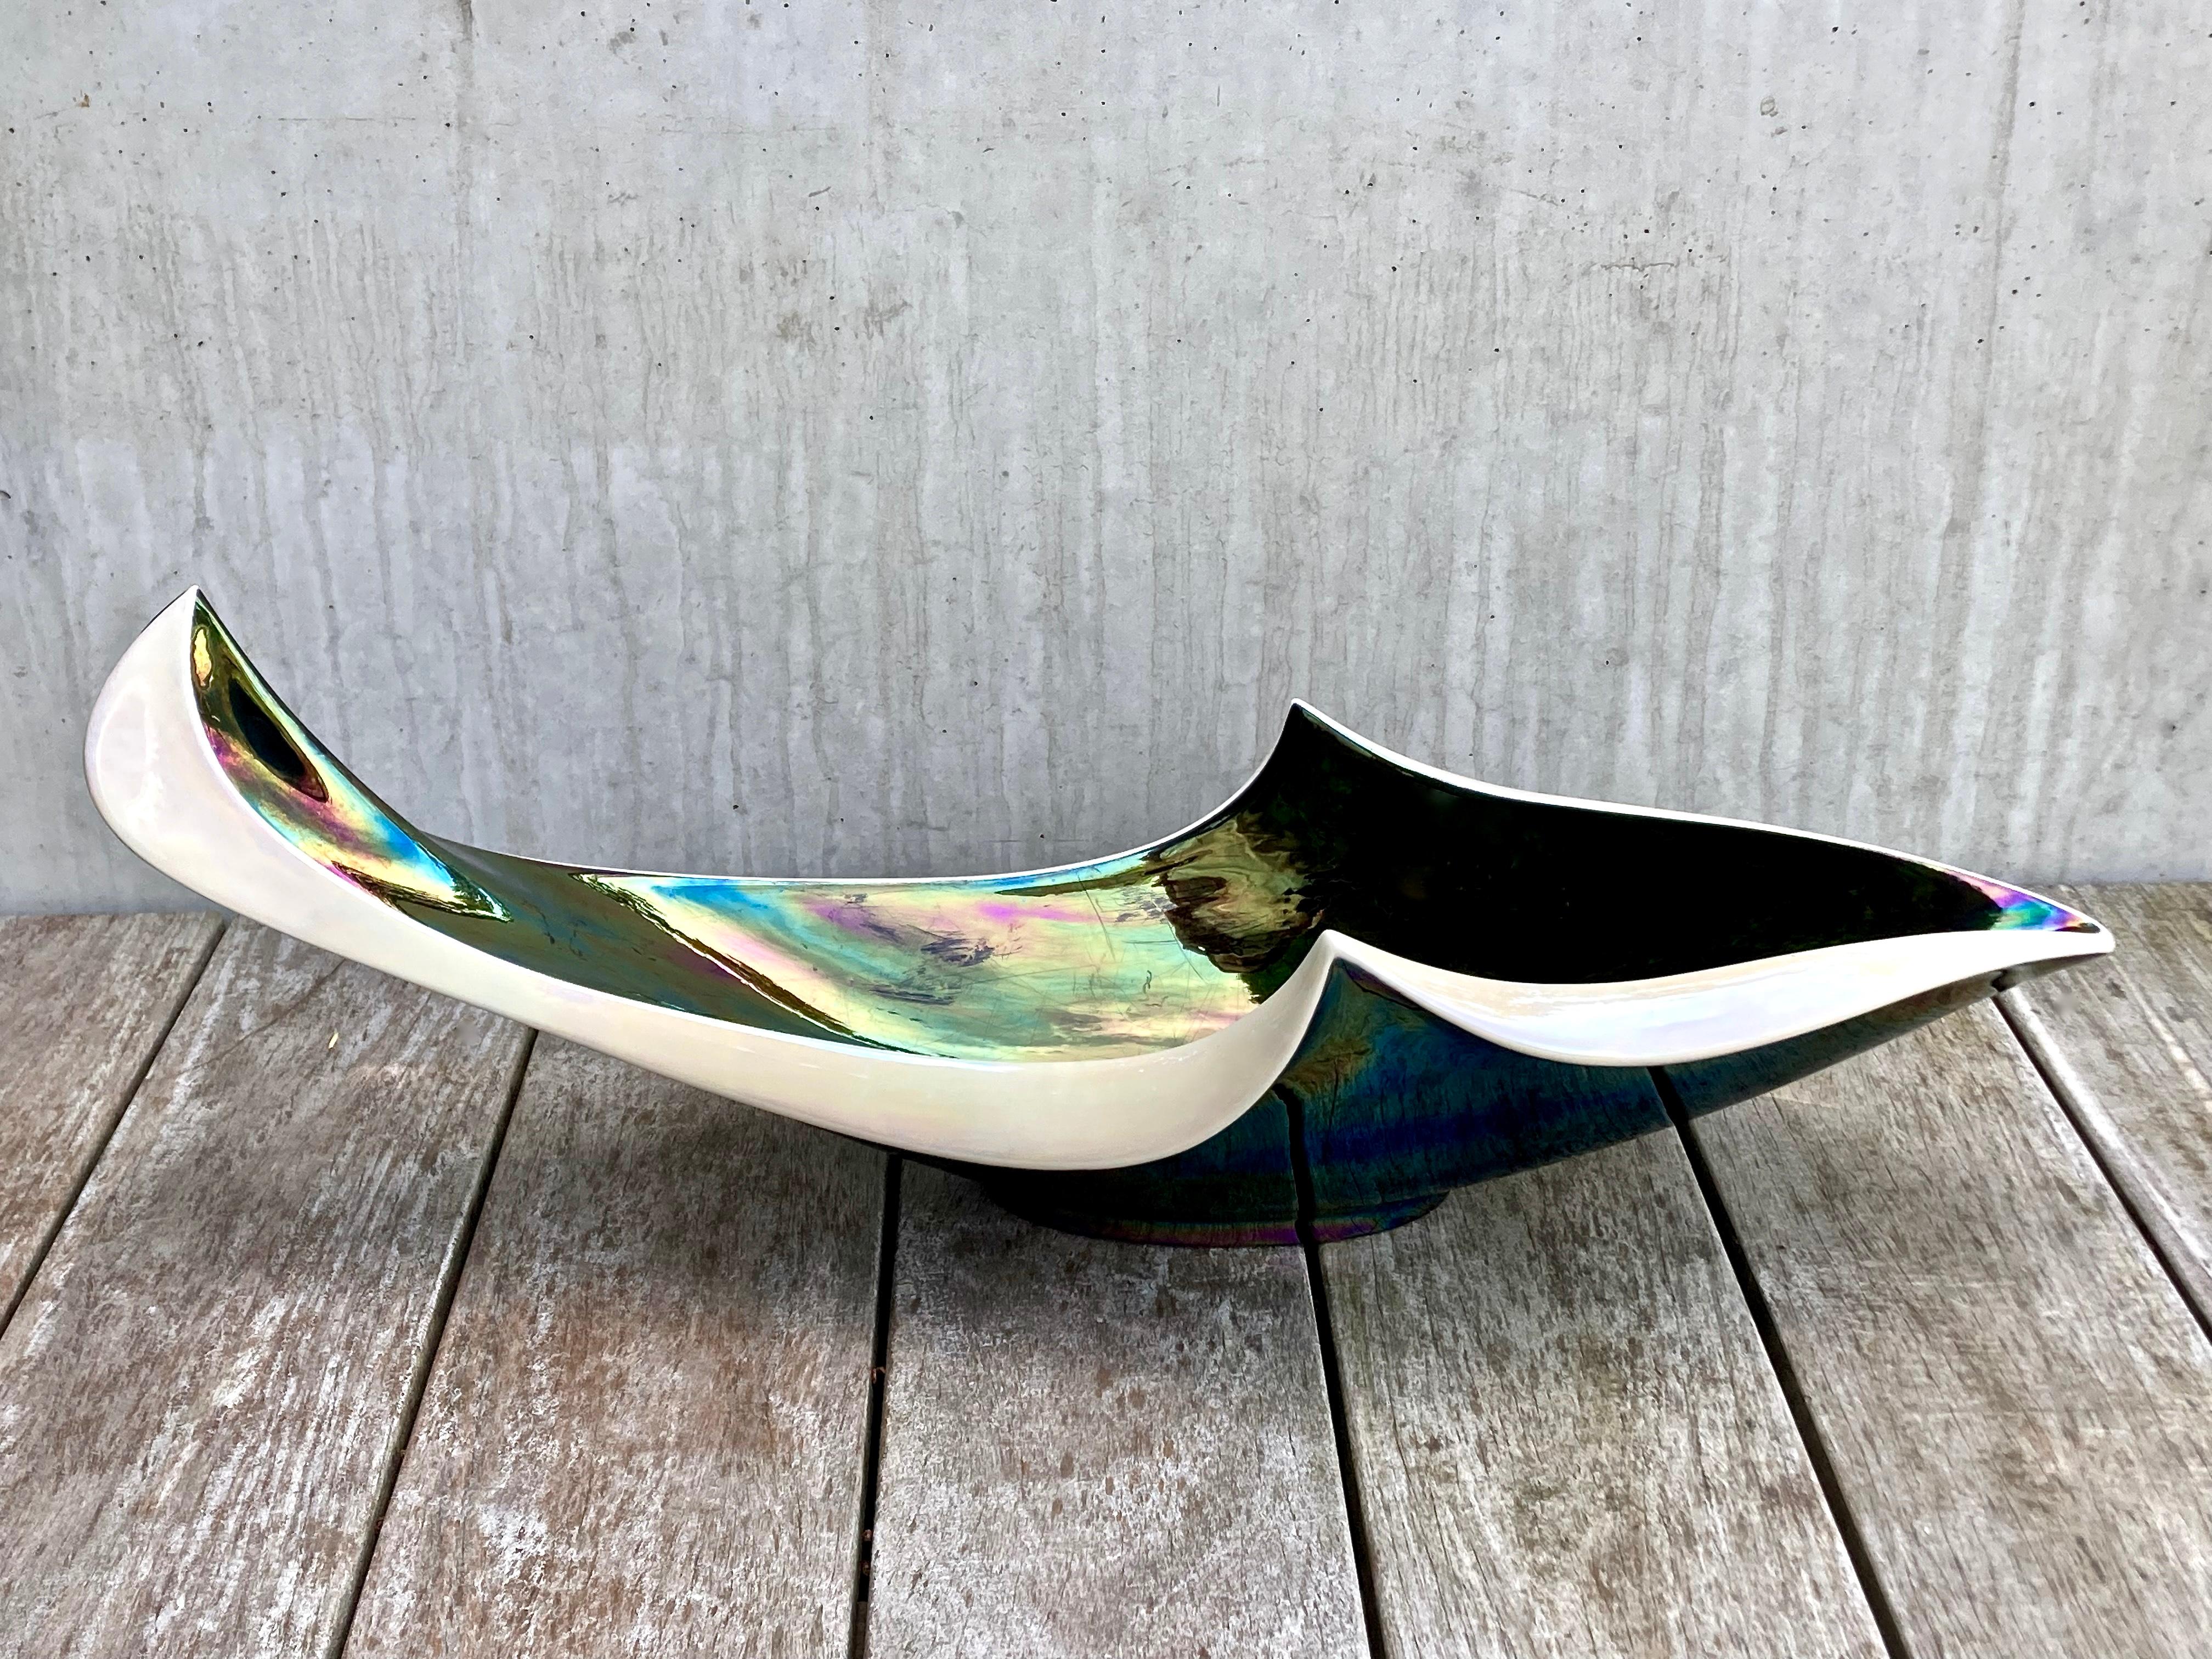 Mid-century modern at its very best. An iconic piece of authentic mid-century French art pottery. Most collectible! 

This incredible piece, it would be an understatement to simple call it a fruit bowl, was made by the French ceramic company